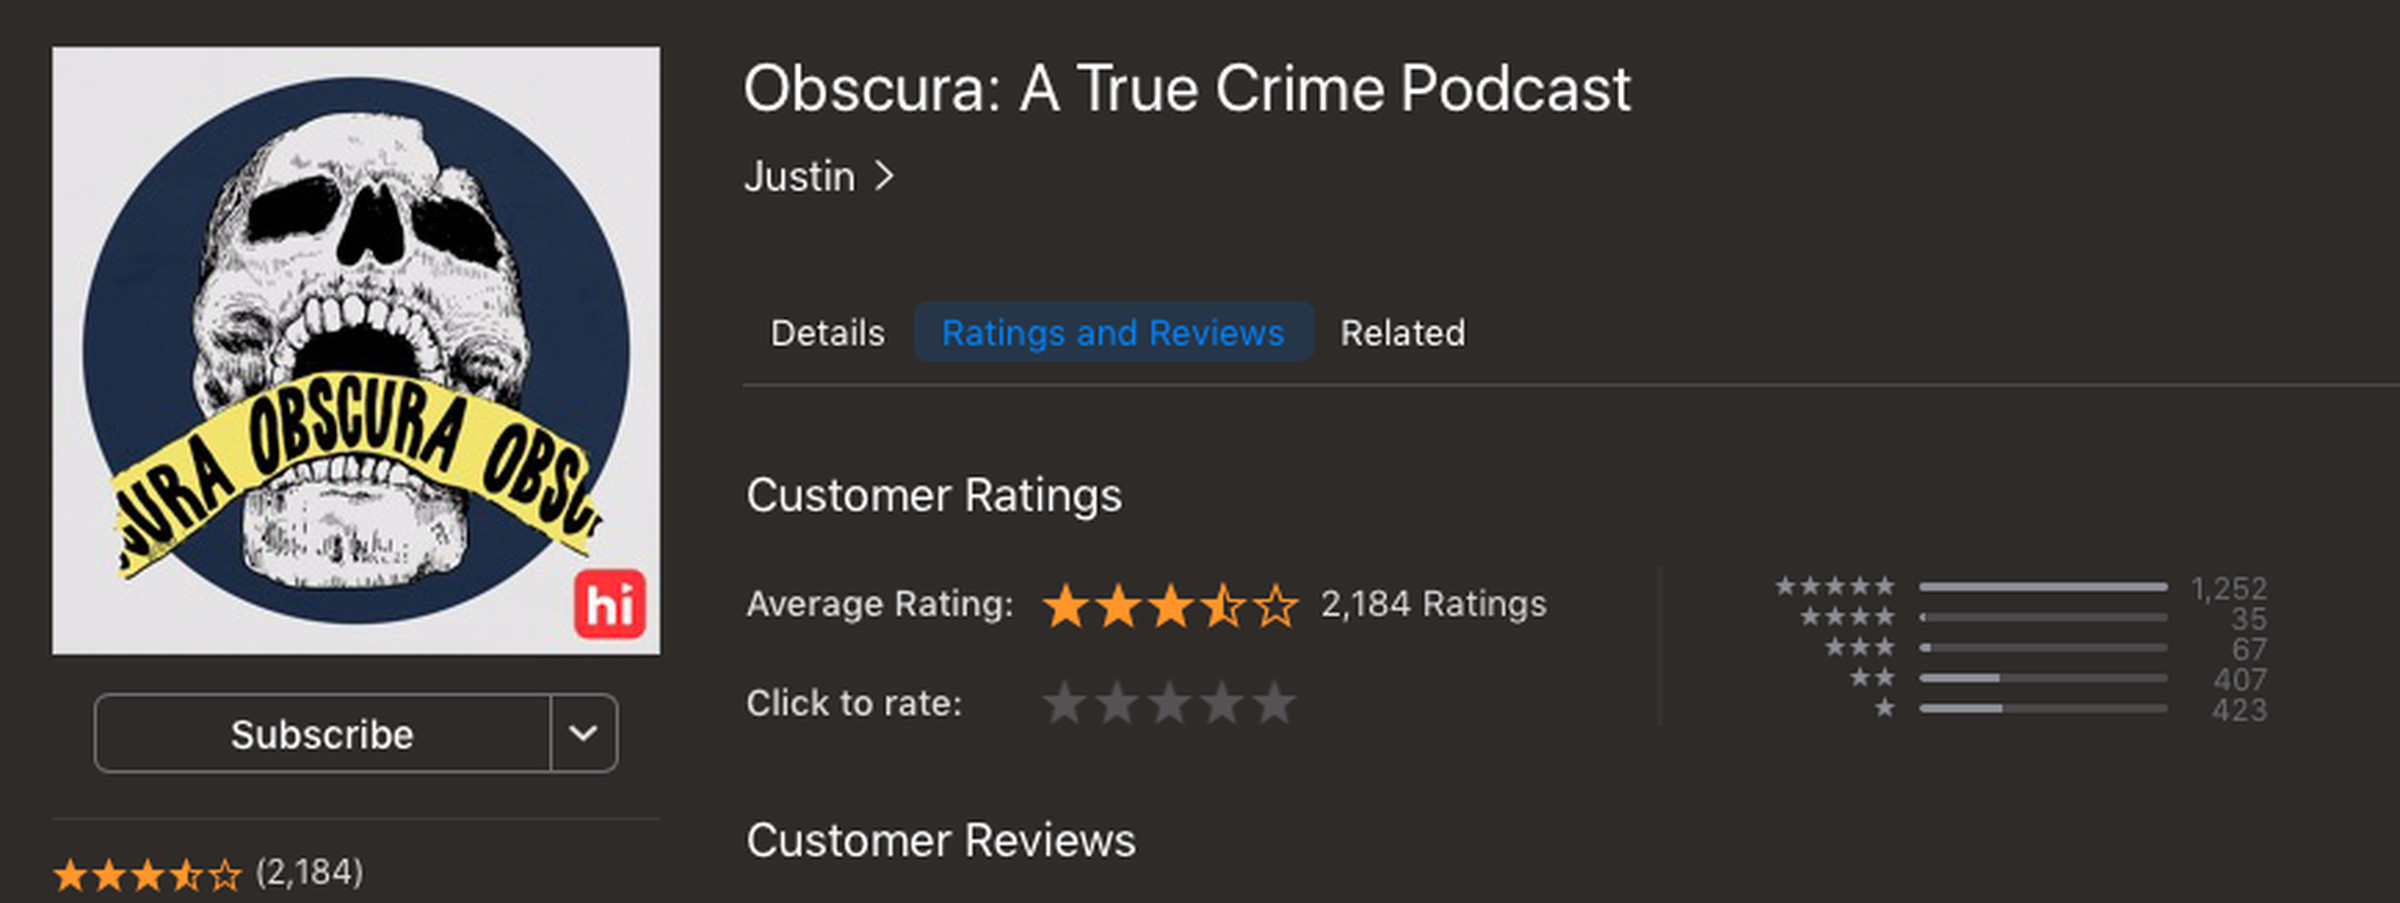 A screenshot of Drown’s Apple Podcasts page after the alleged review bombing